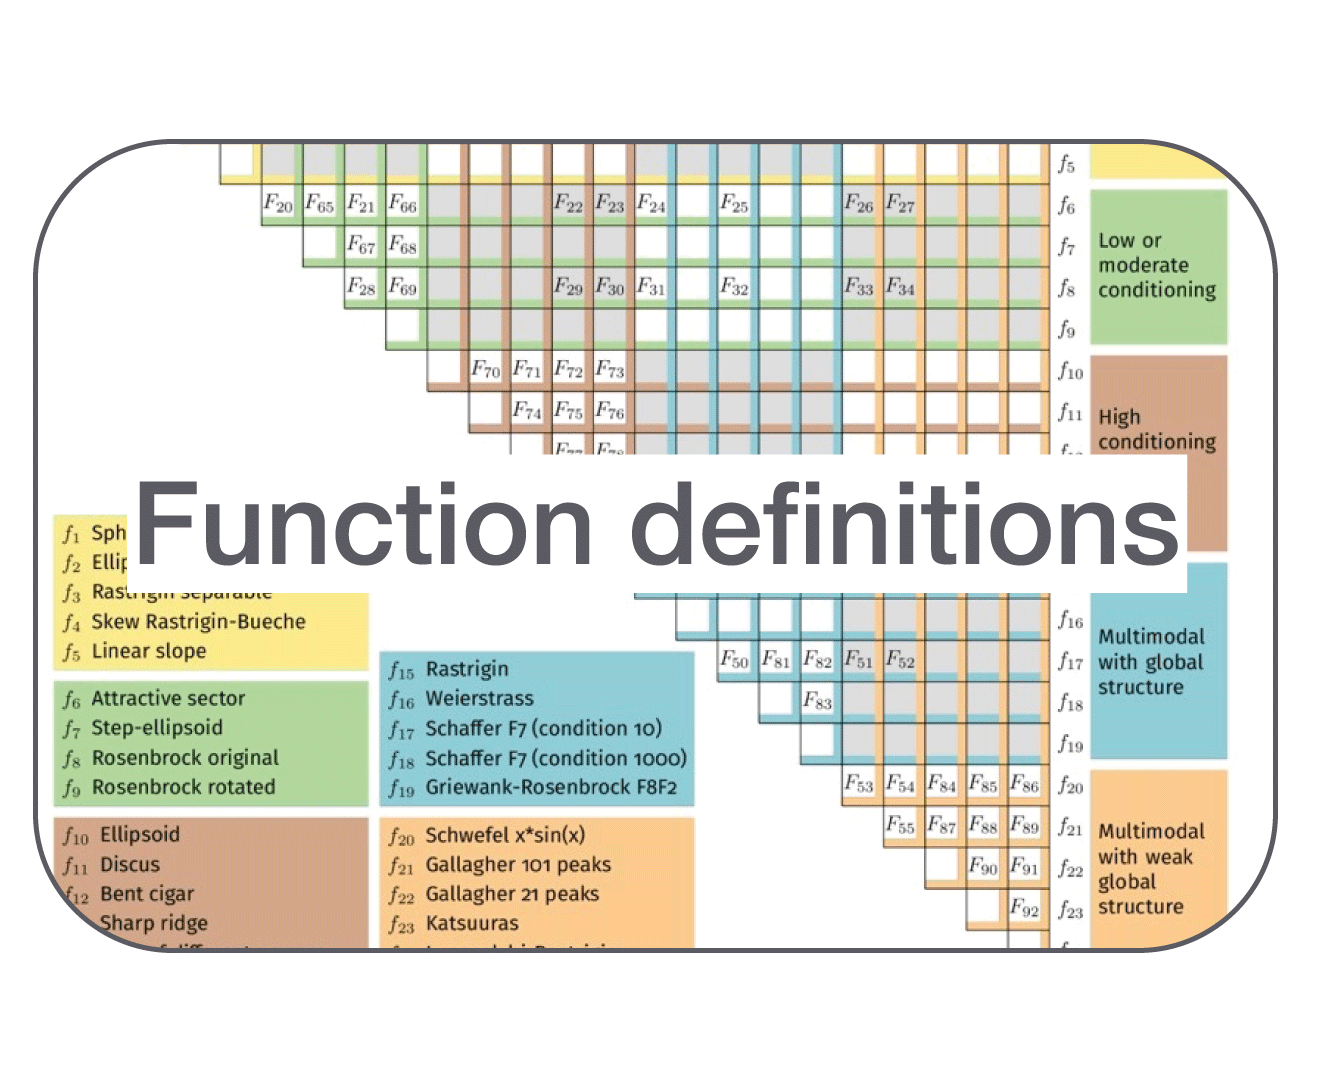 Functions definitions